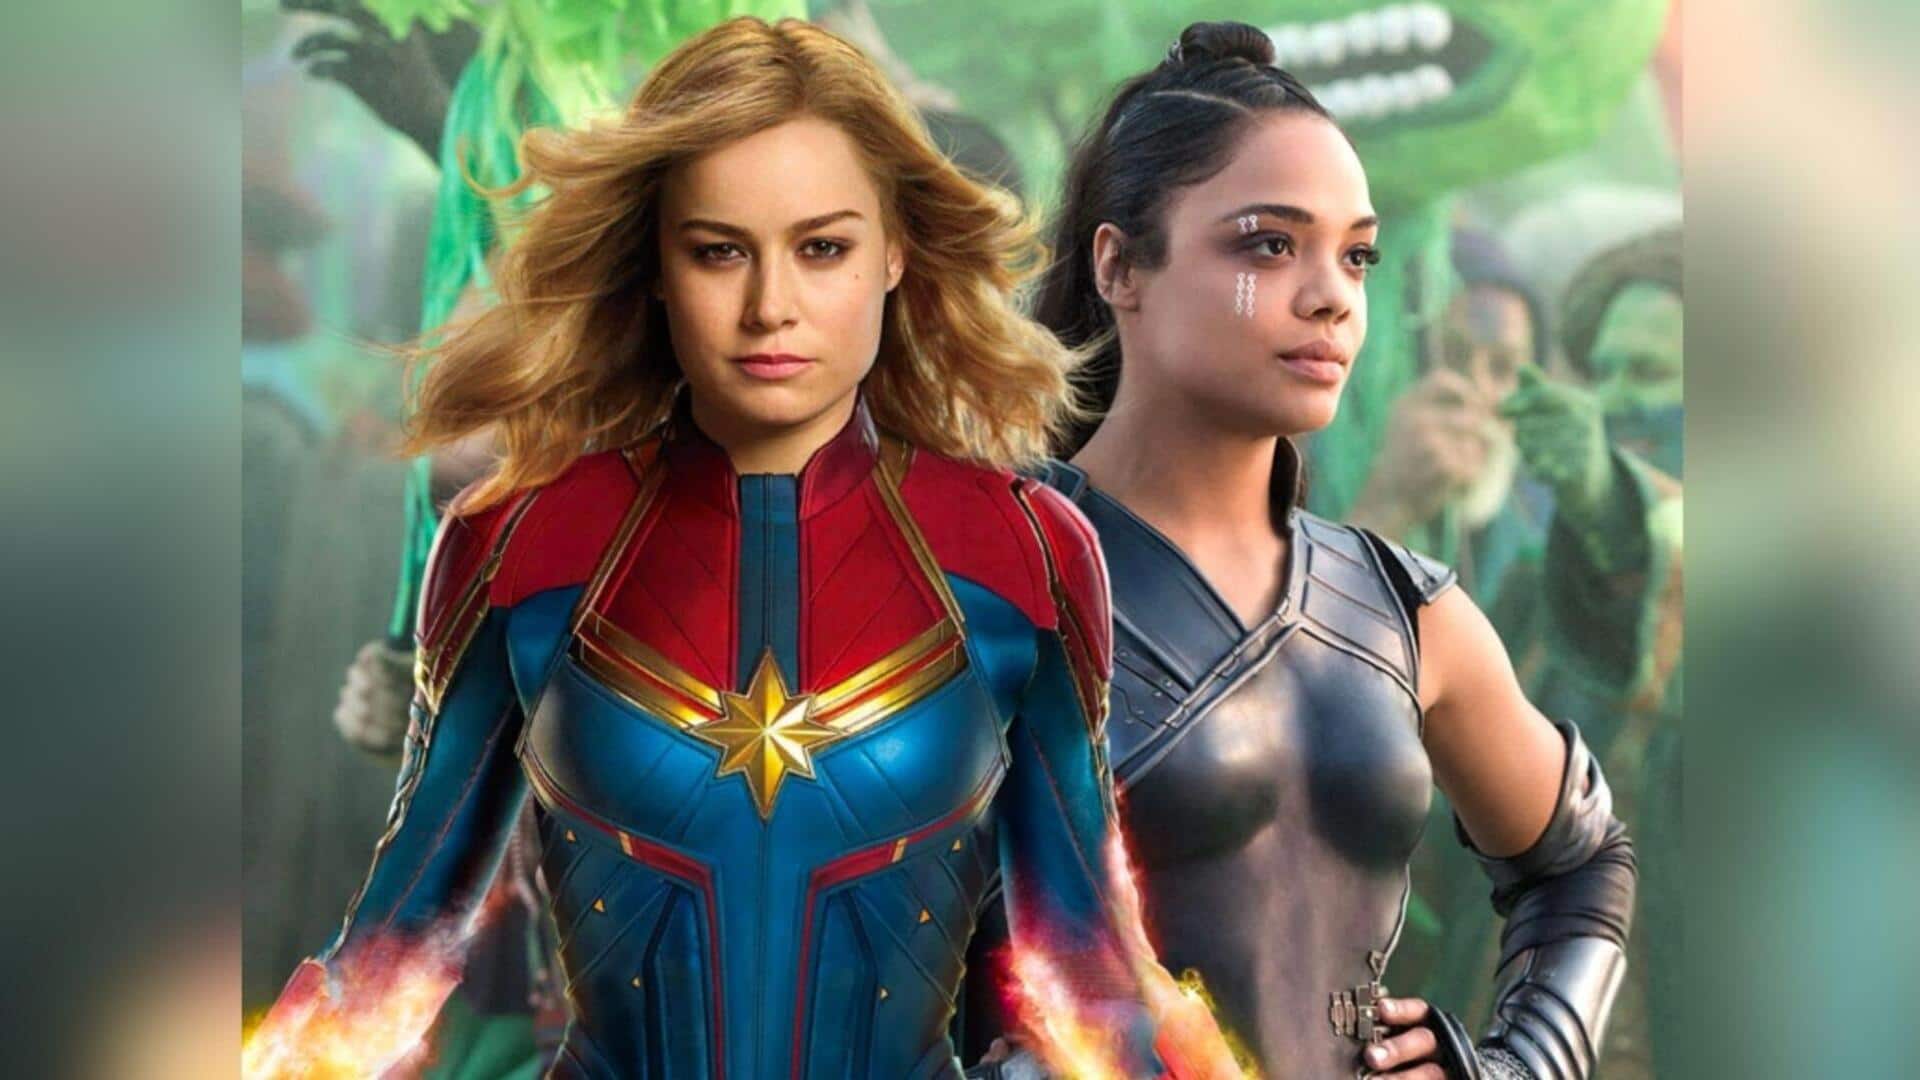 Why 'Captain Marvel' Matters